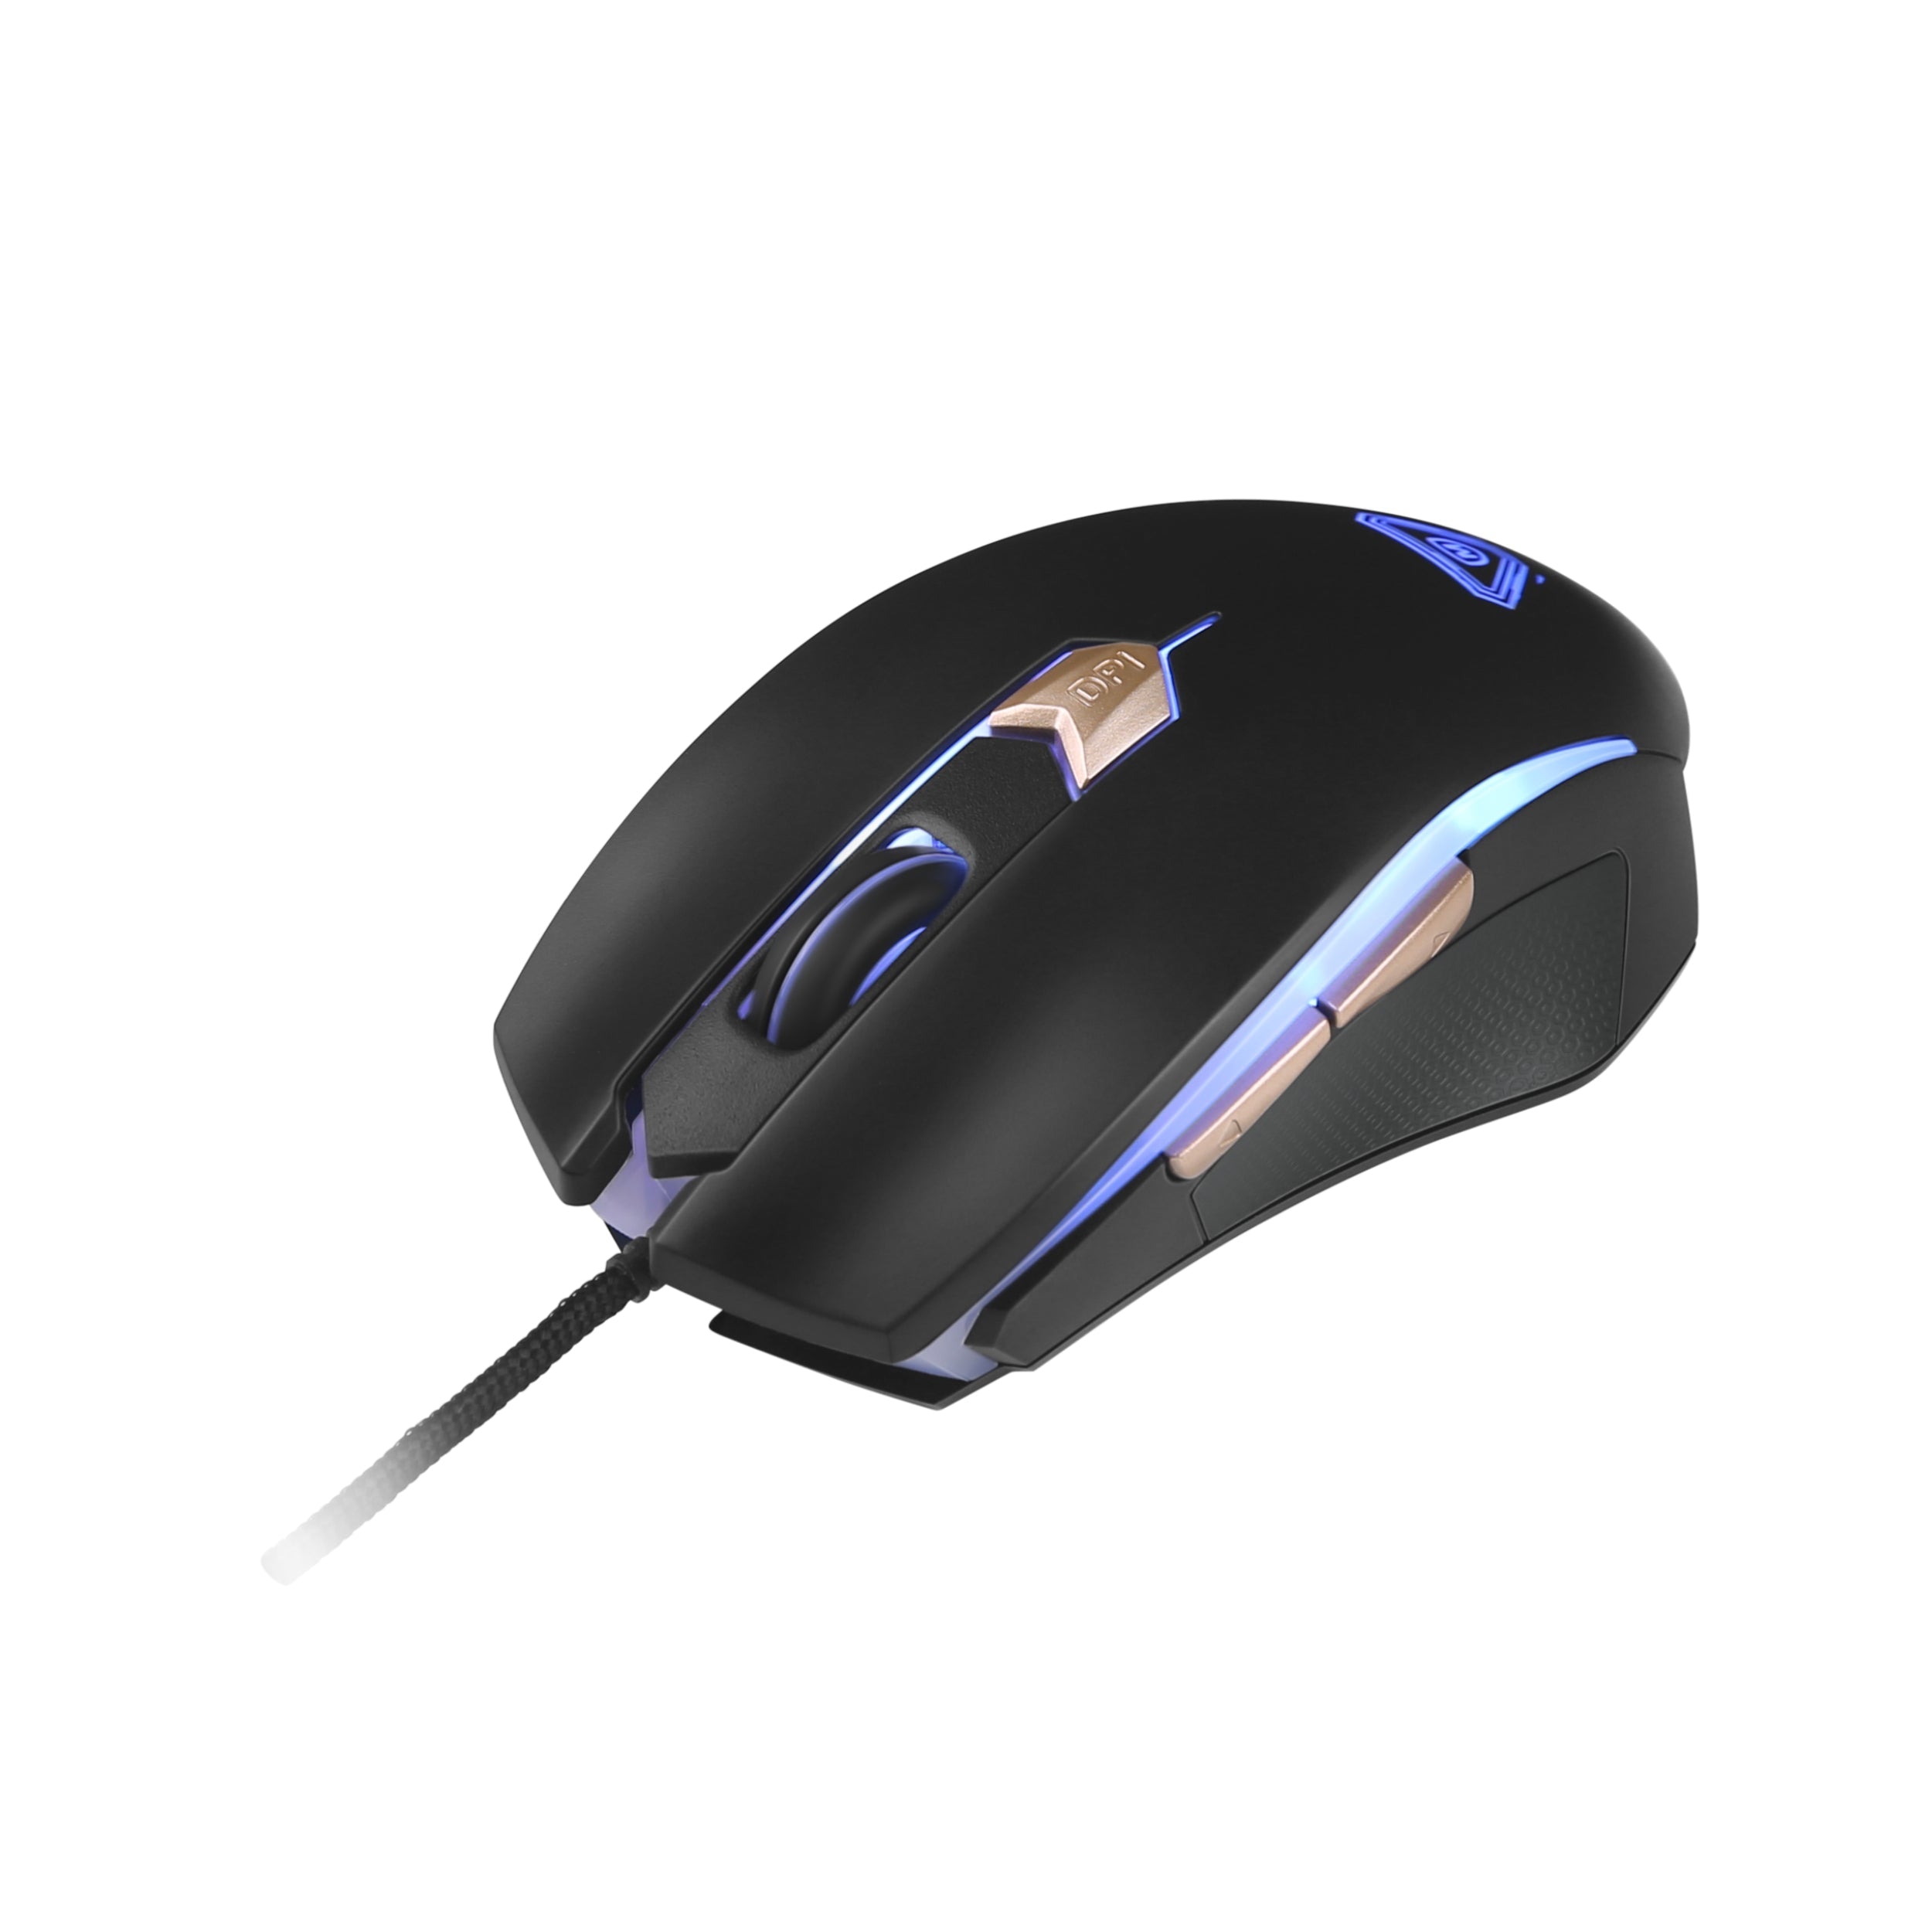 Wholesale Wired Gaming Mouse Supply Gaming Mouse MICROPACK GM-06